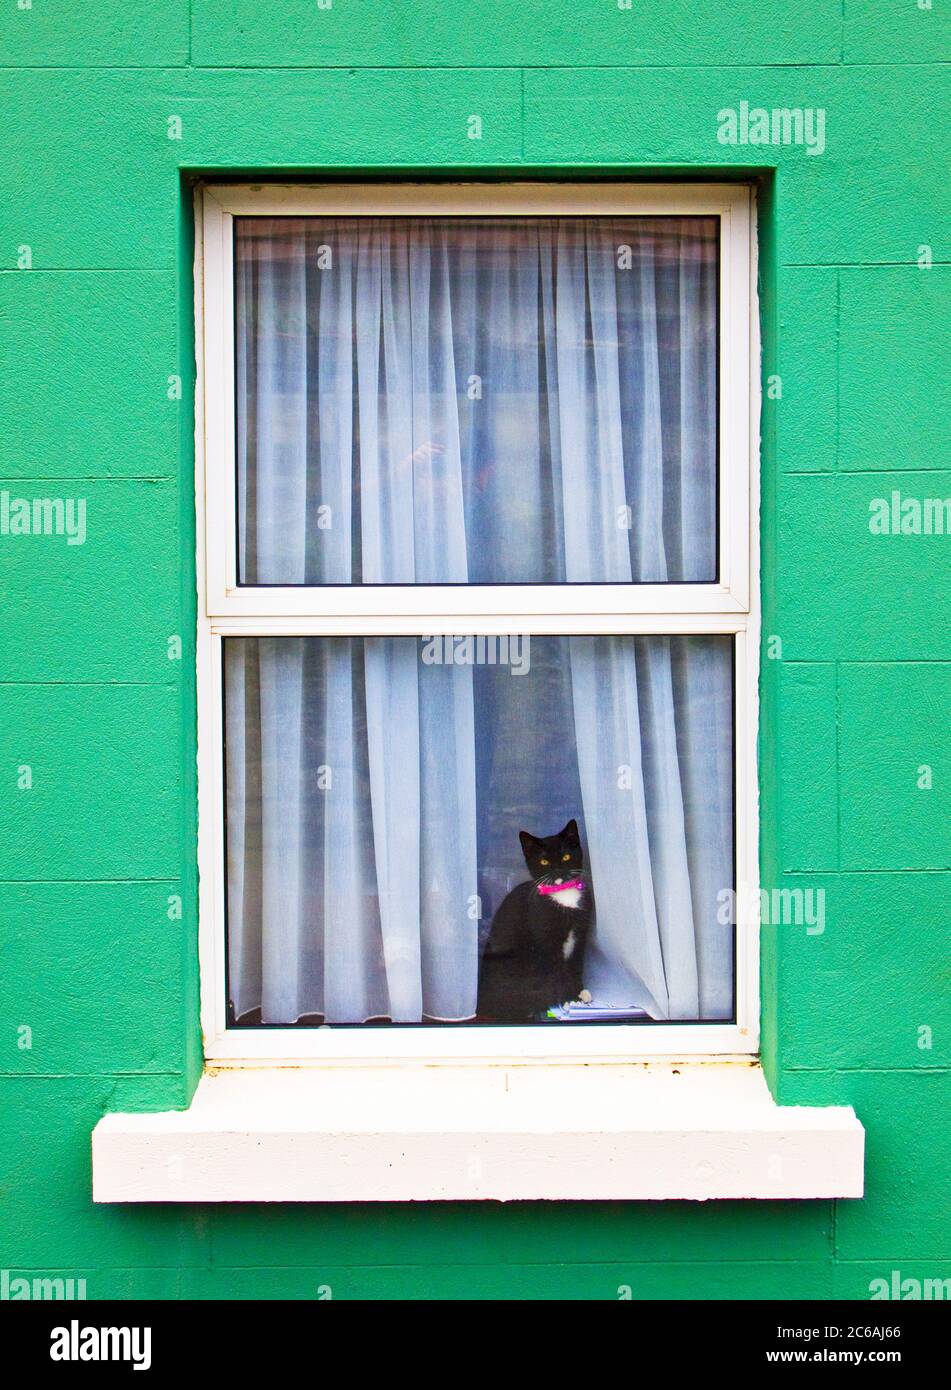 A black kitten looking out of a window Stock Photo